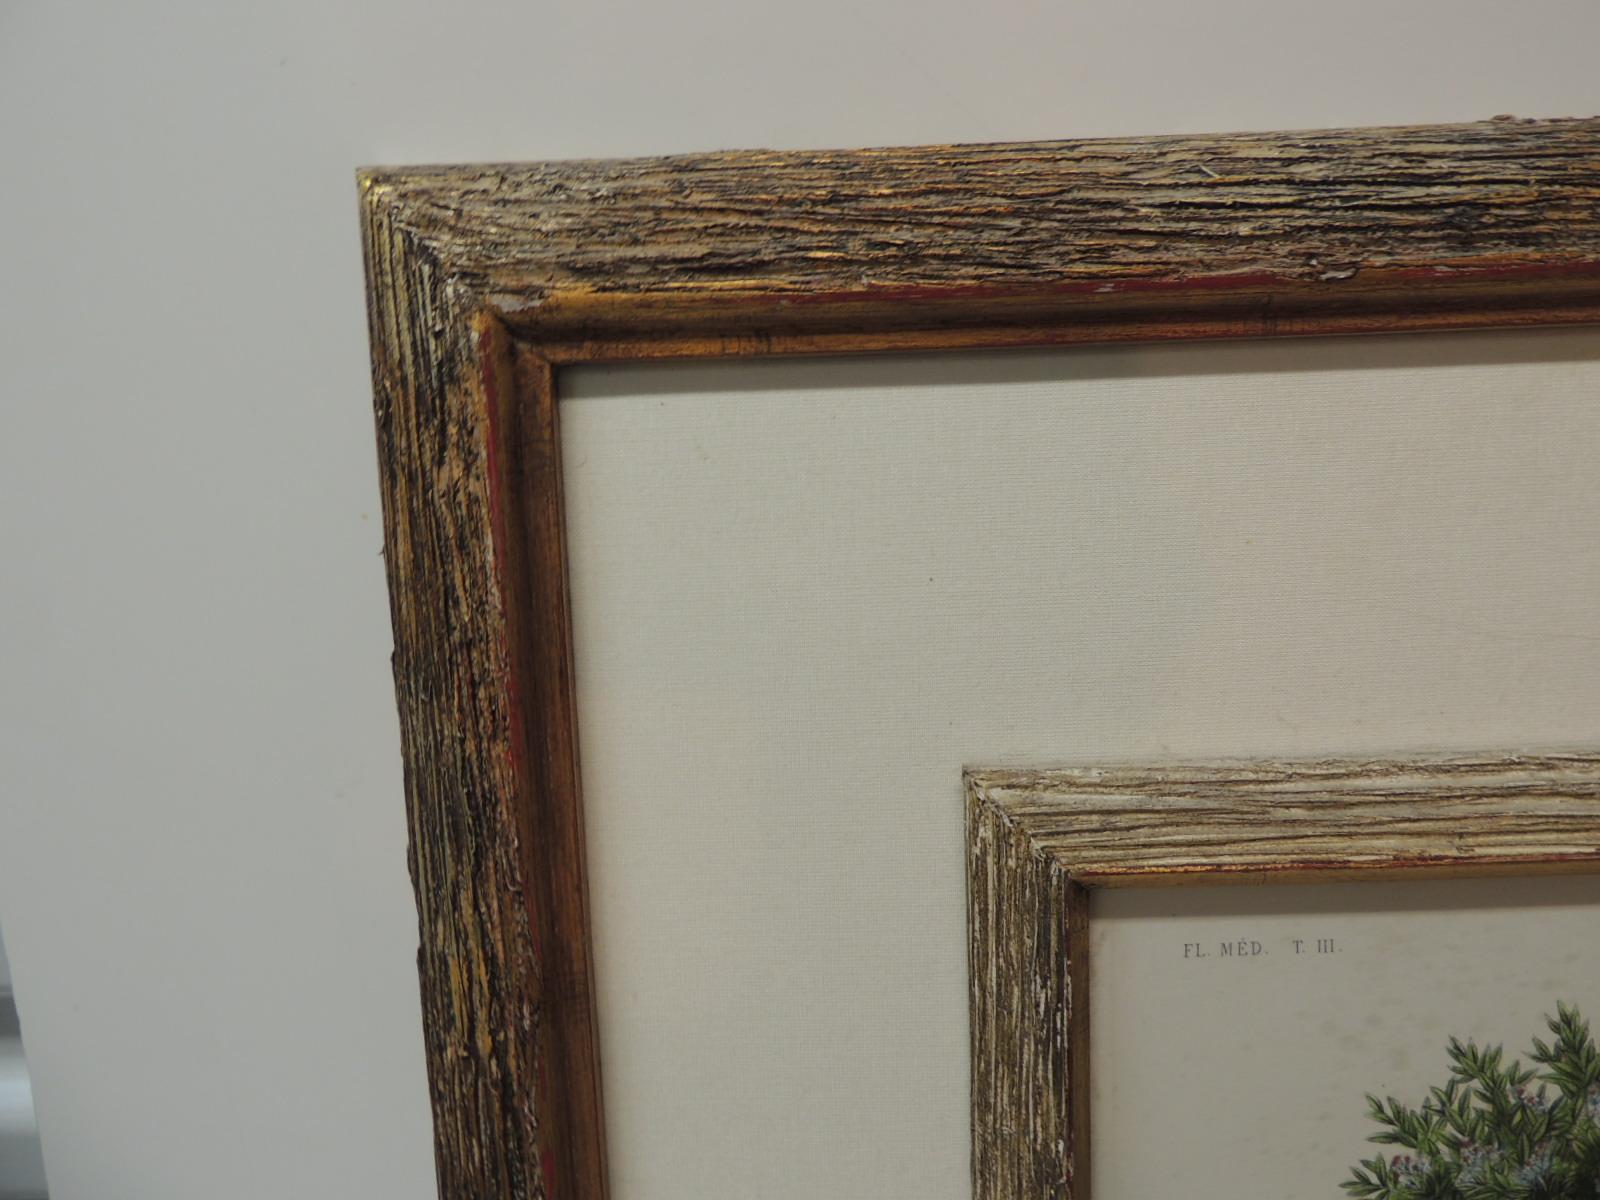 Hand-Crafted Framed Botanical Print in a Wood Bark Style Frame with Gold Leaf Accents